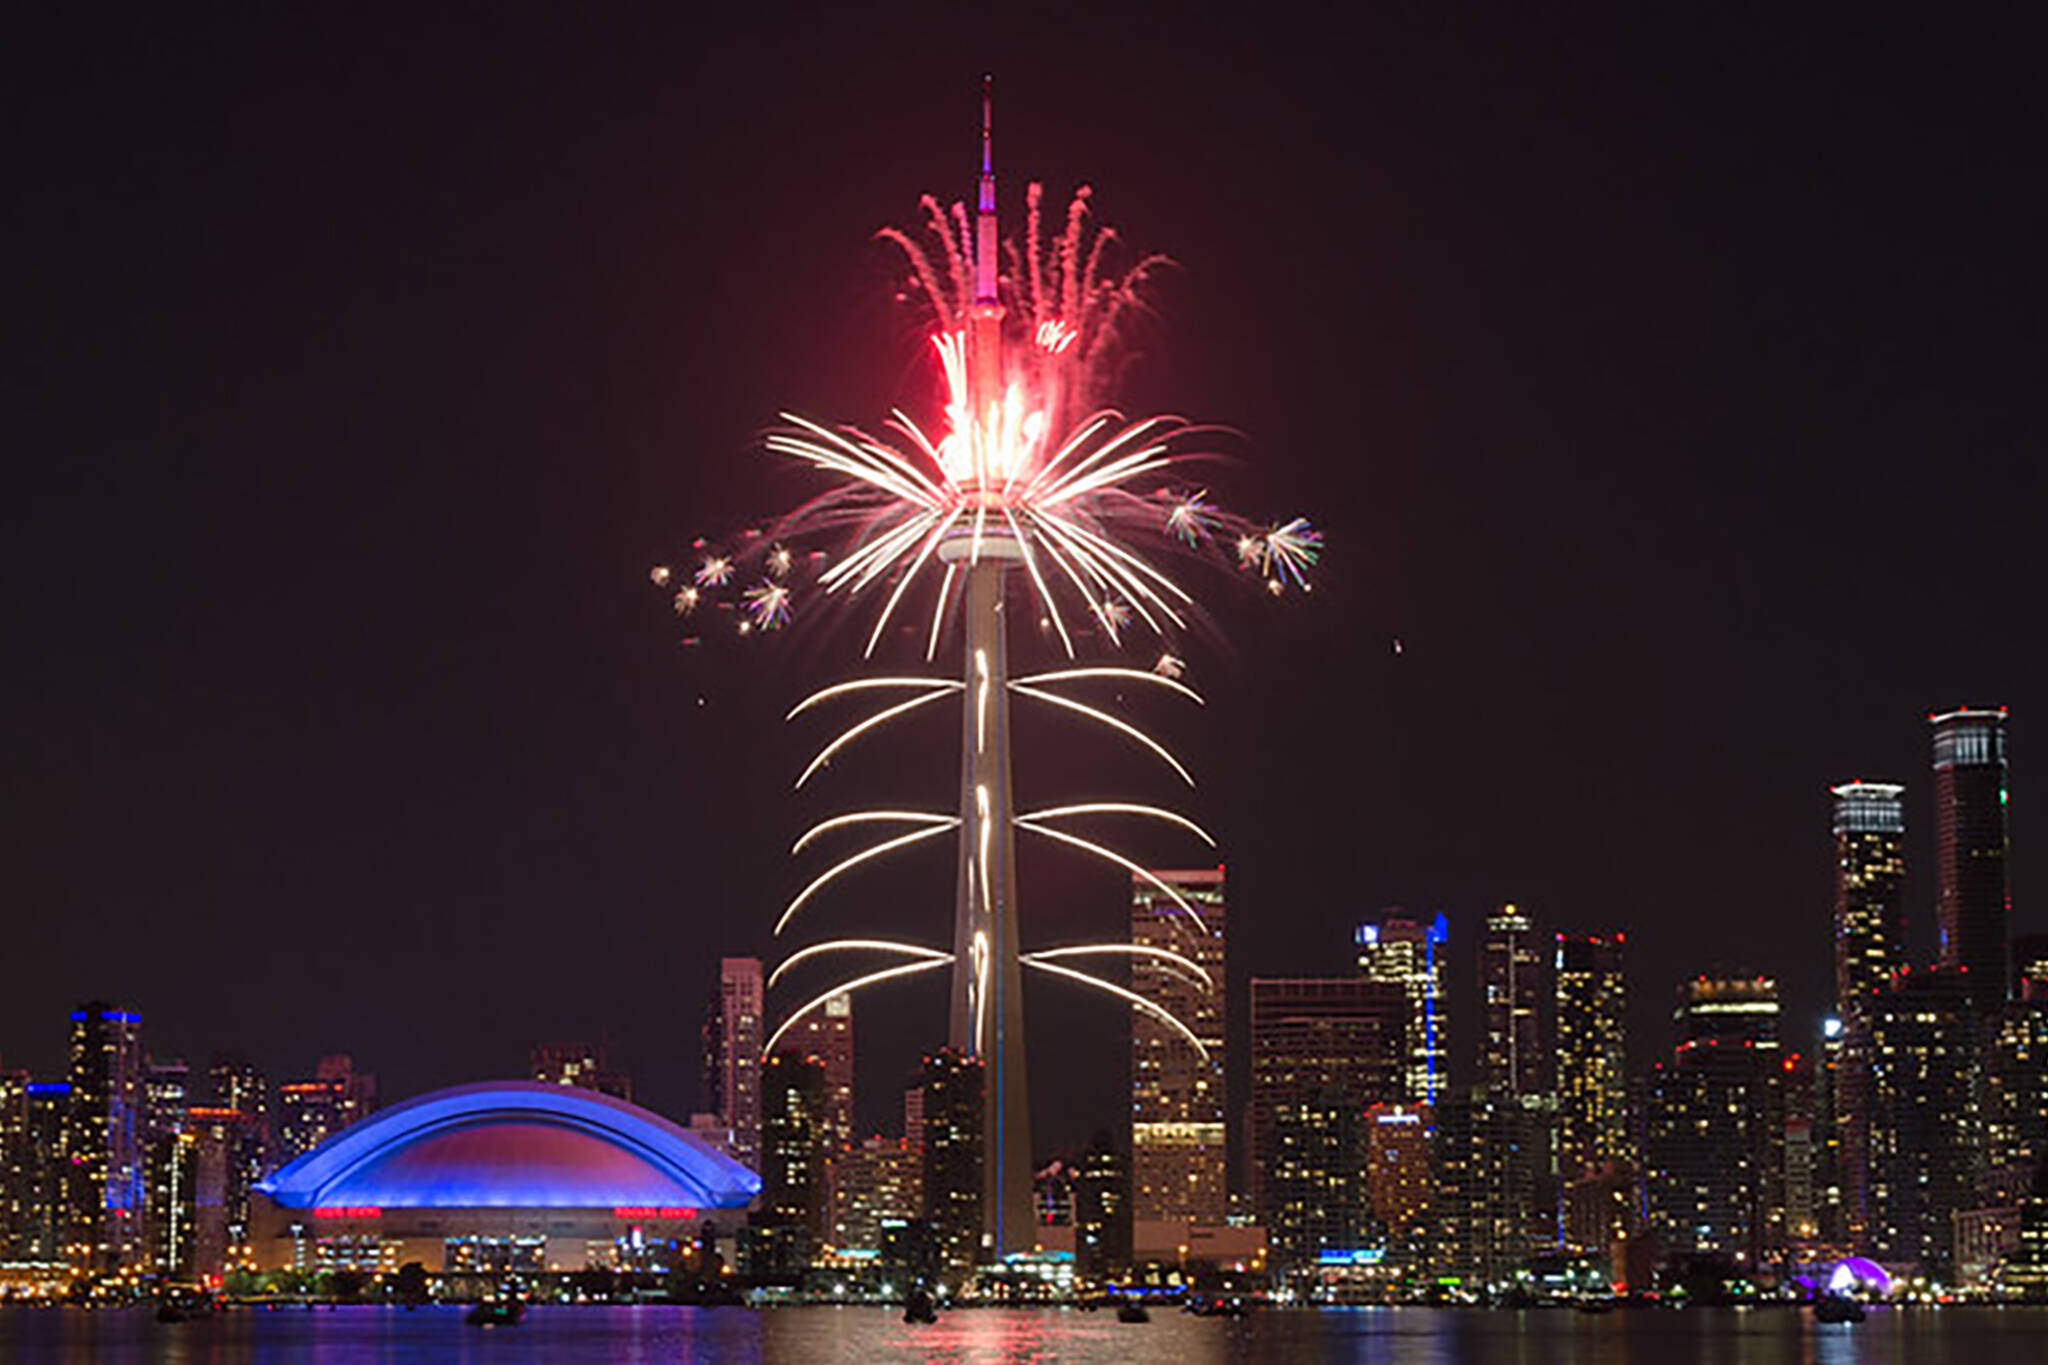 20221130 Cn Tower Nye ?w=2048&cmd=resize Then Crop&height=1365&quality=70